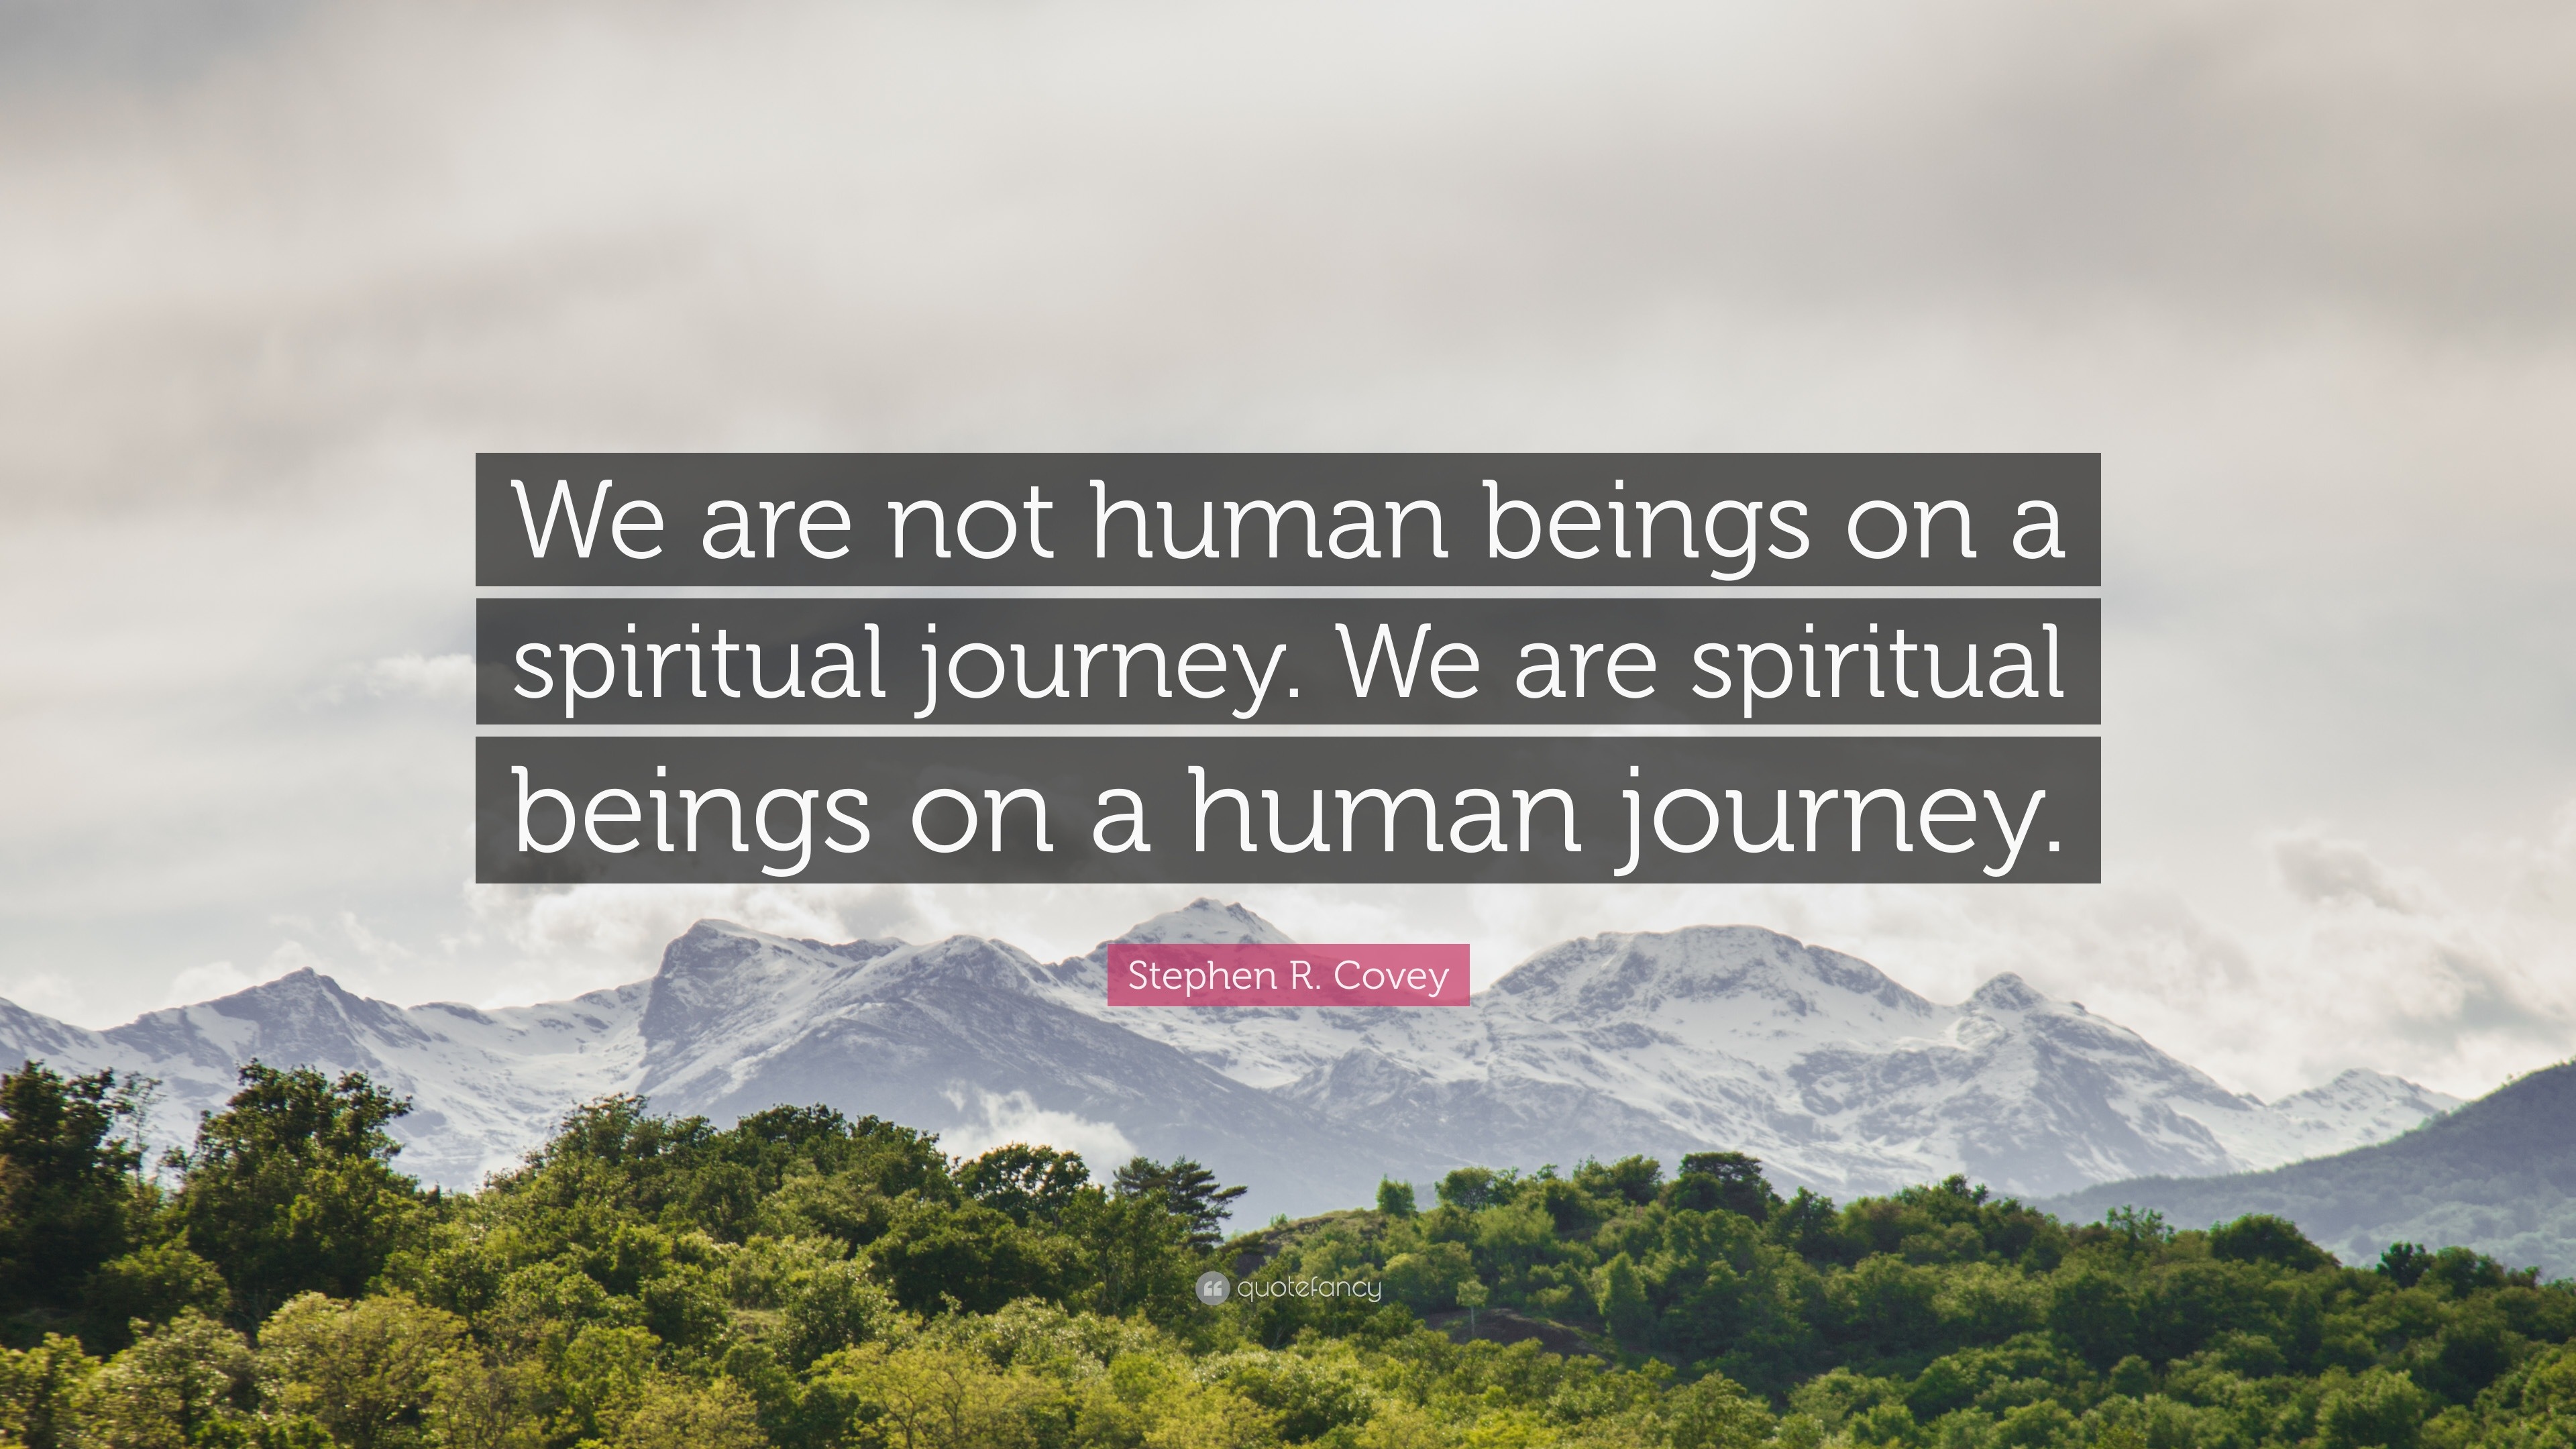 we are not human beings quote